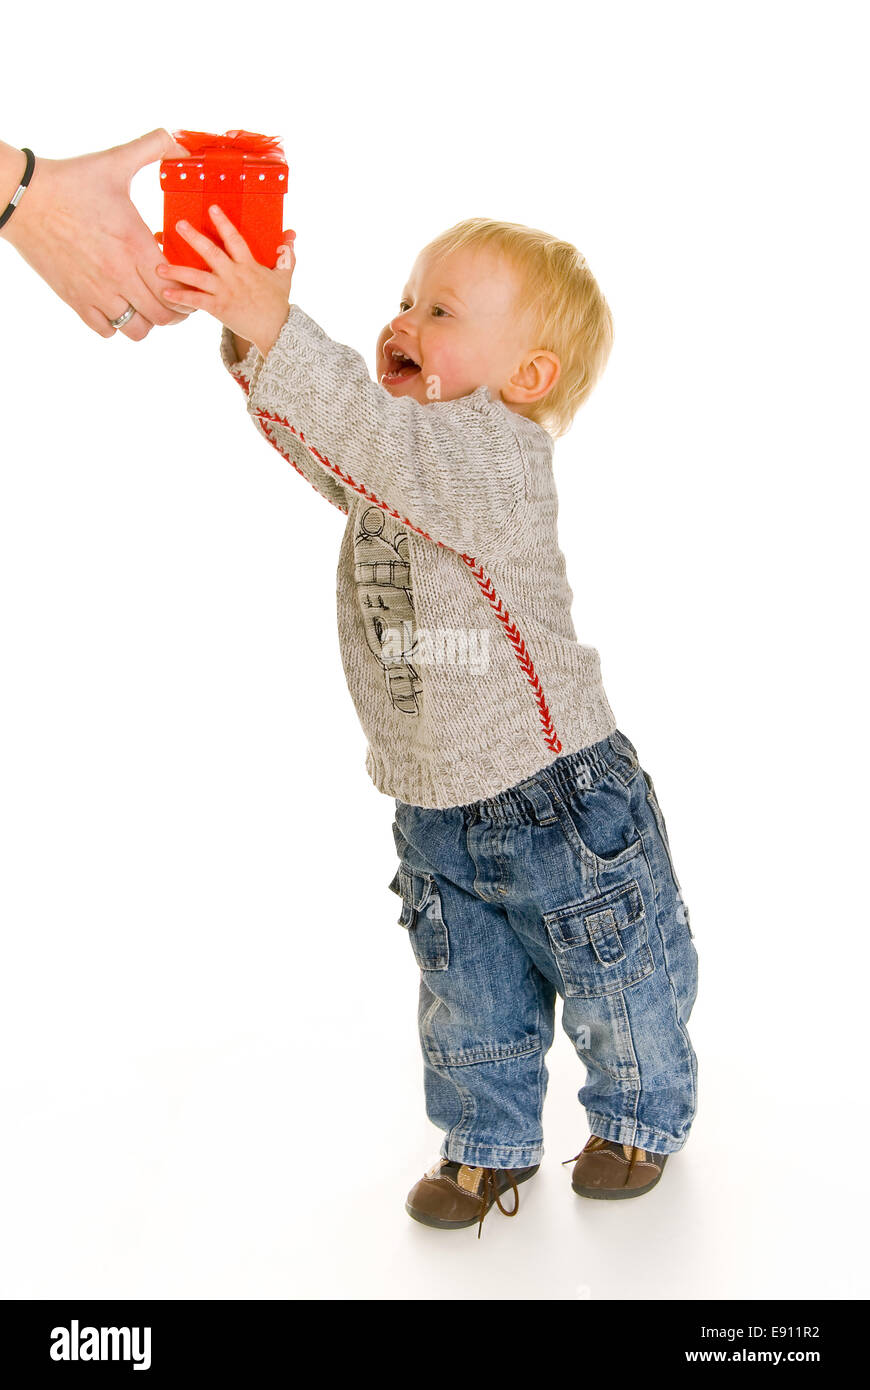 Boy with gift box Stock Photo